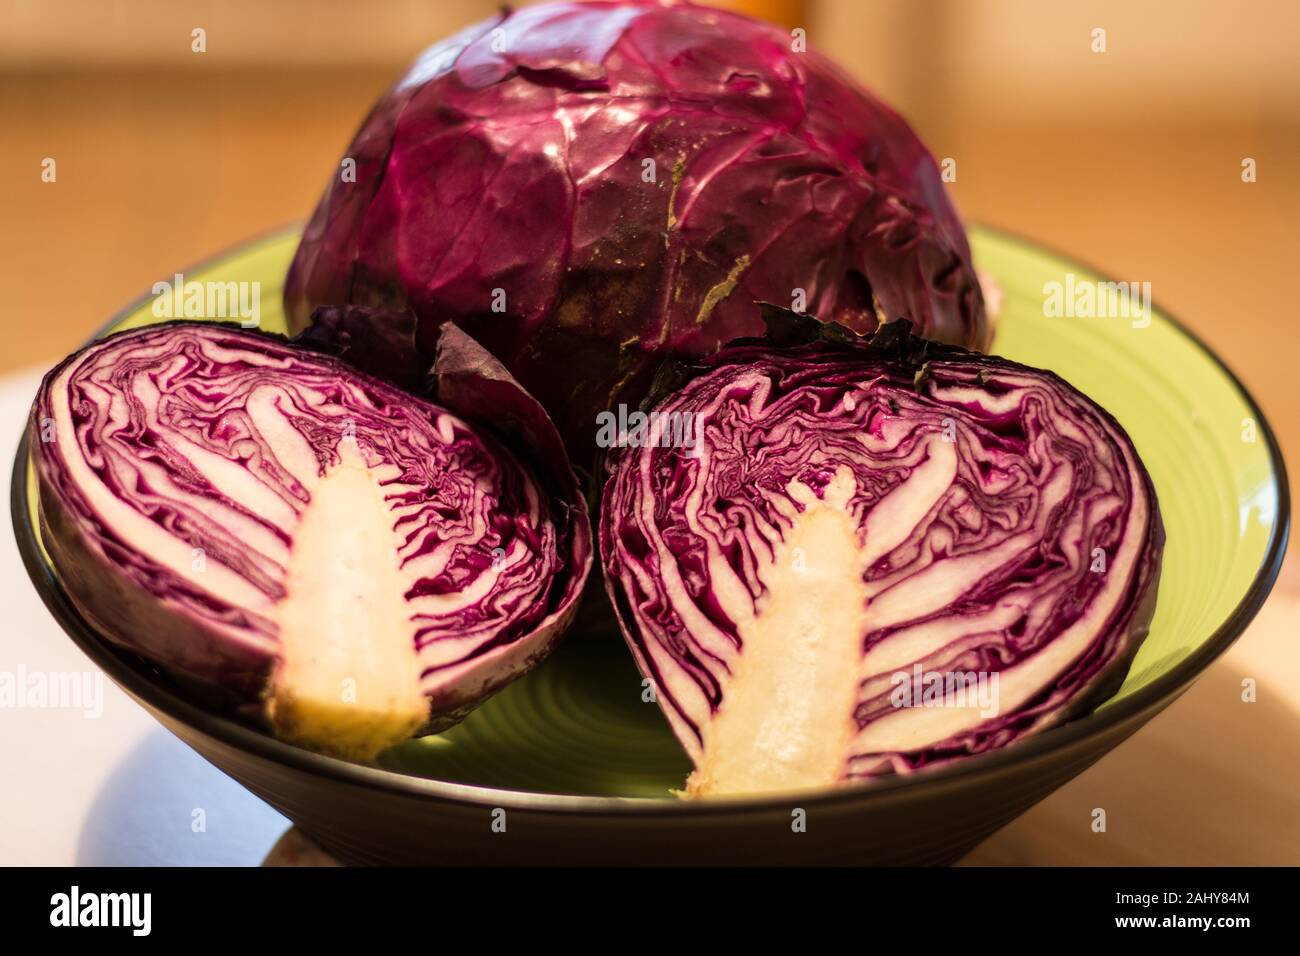 Savoy cabbage or red cabbage, food with beneficial qualities Stock Photo